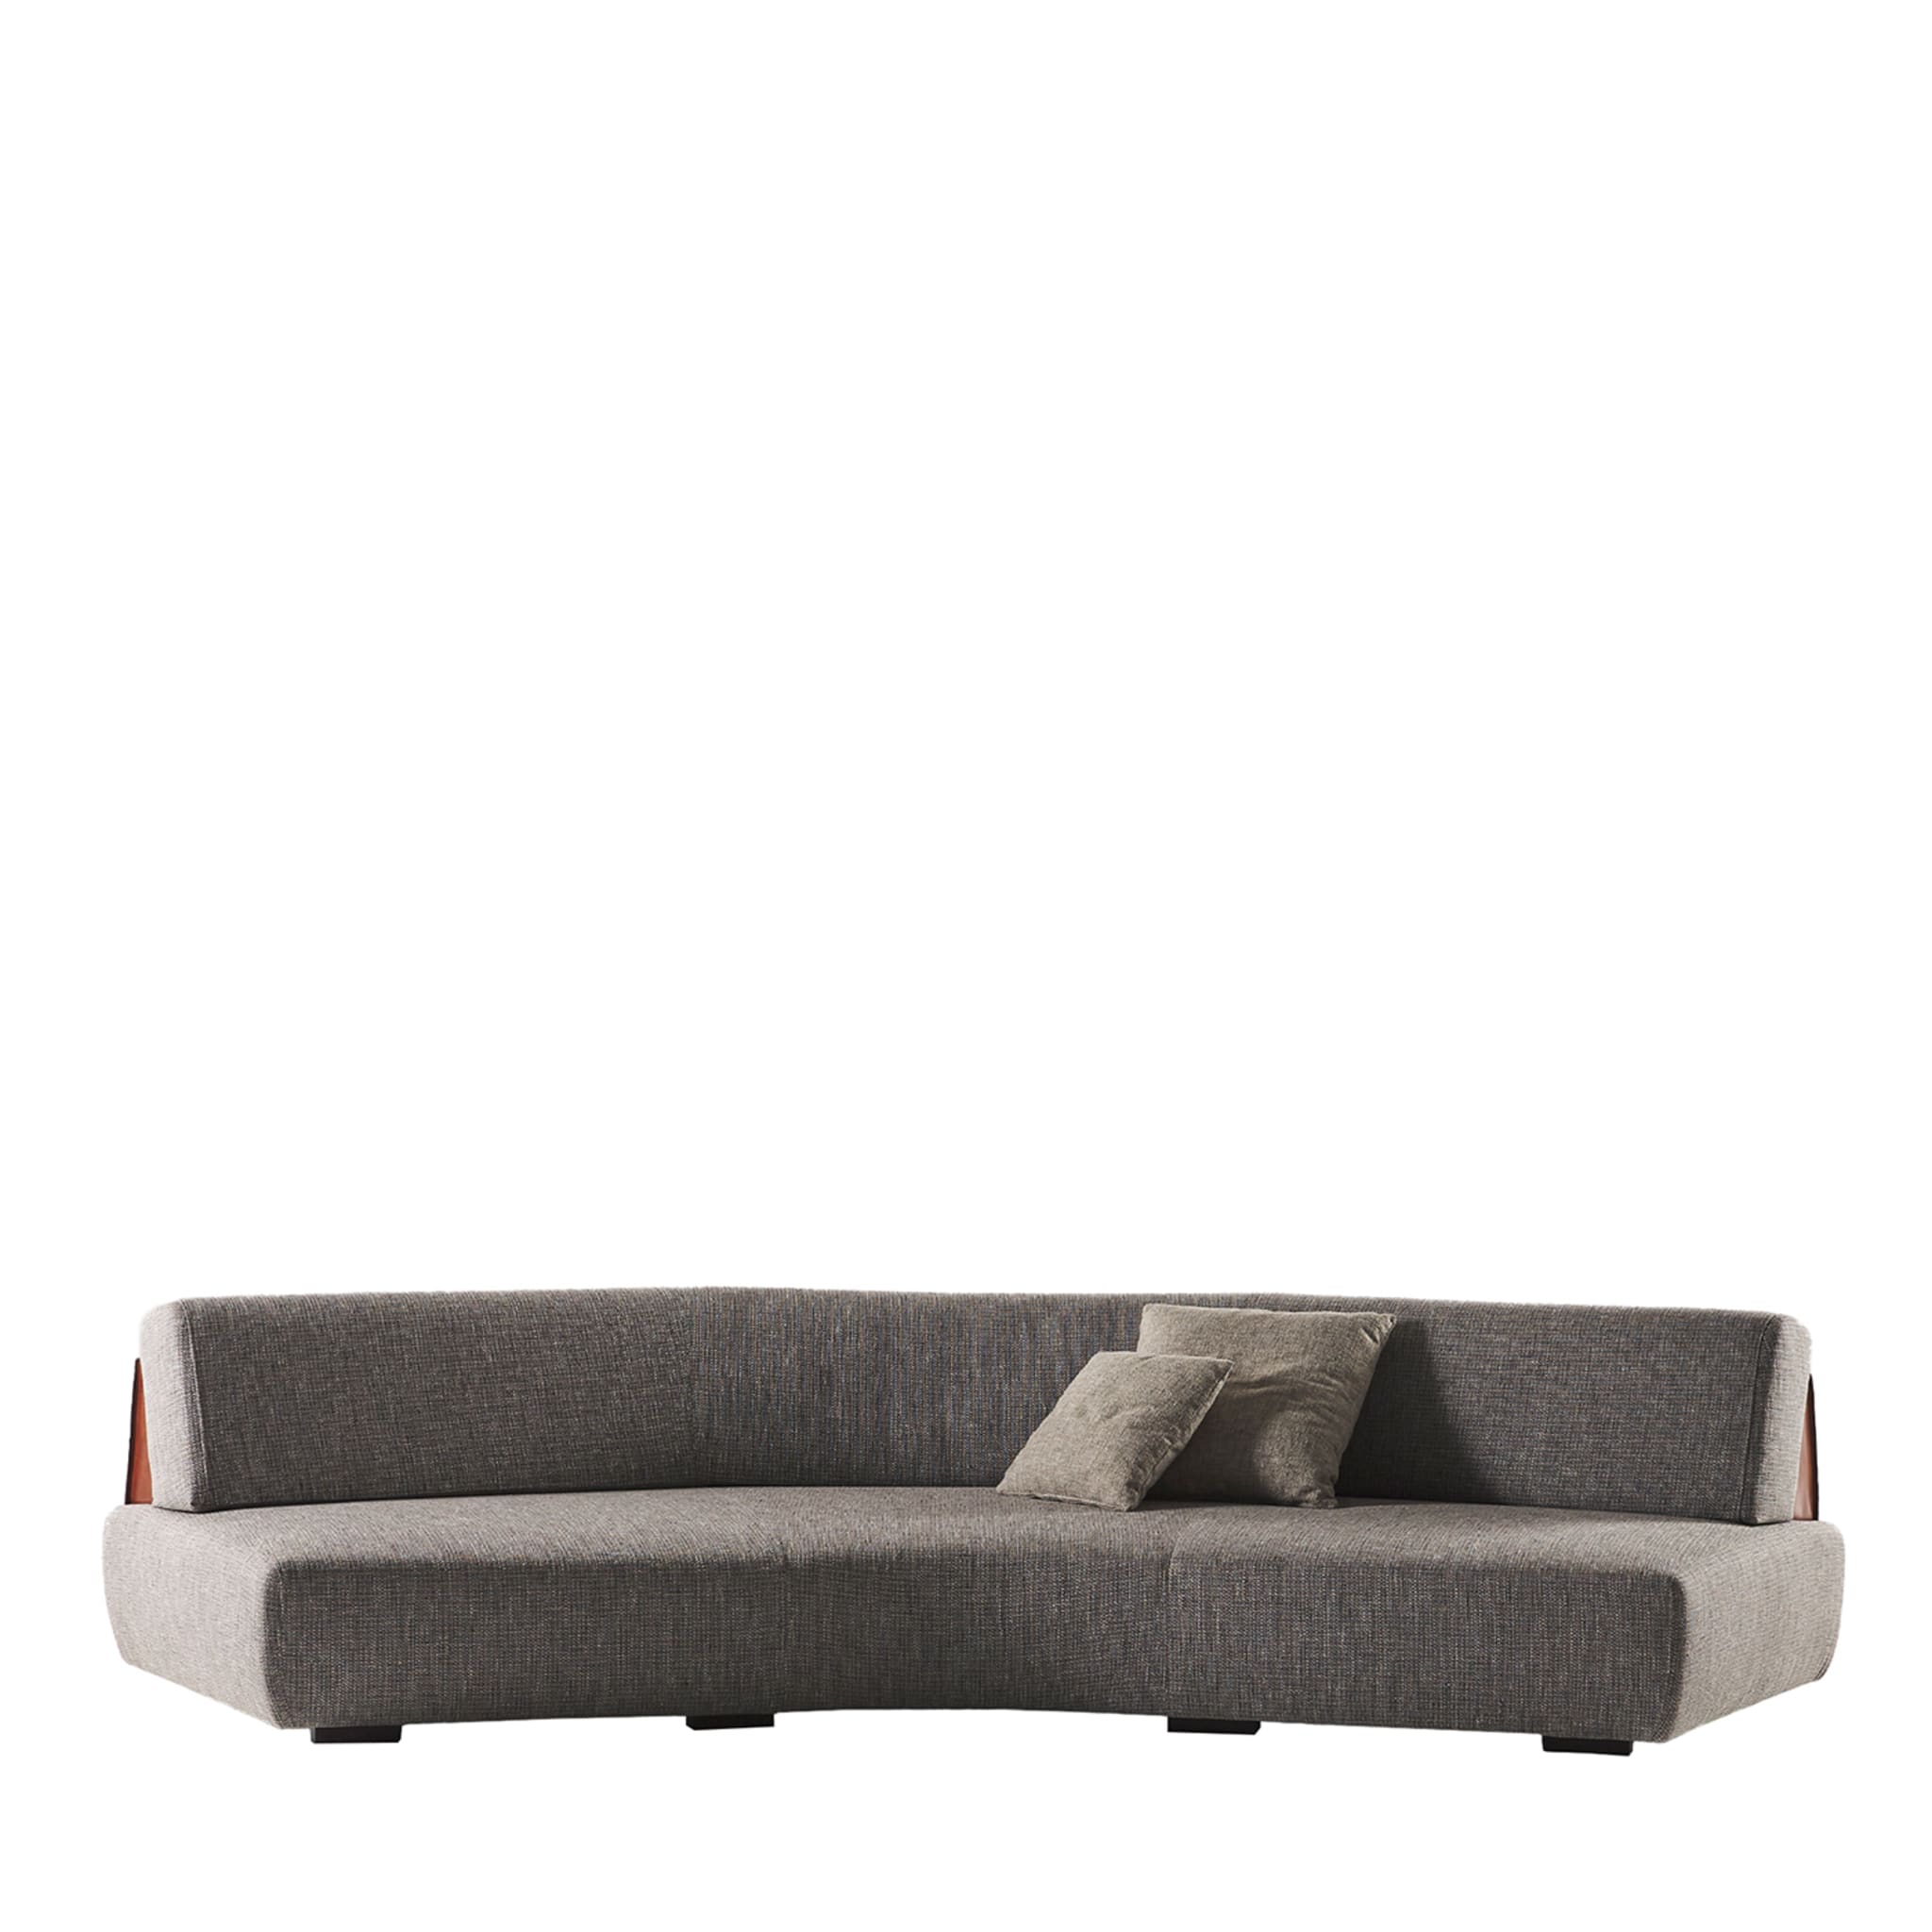 Mistral Curved Gray & Red Sofa - Main view